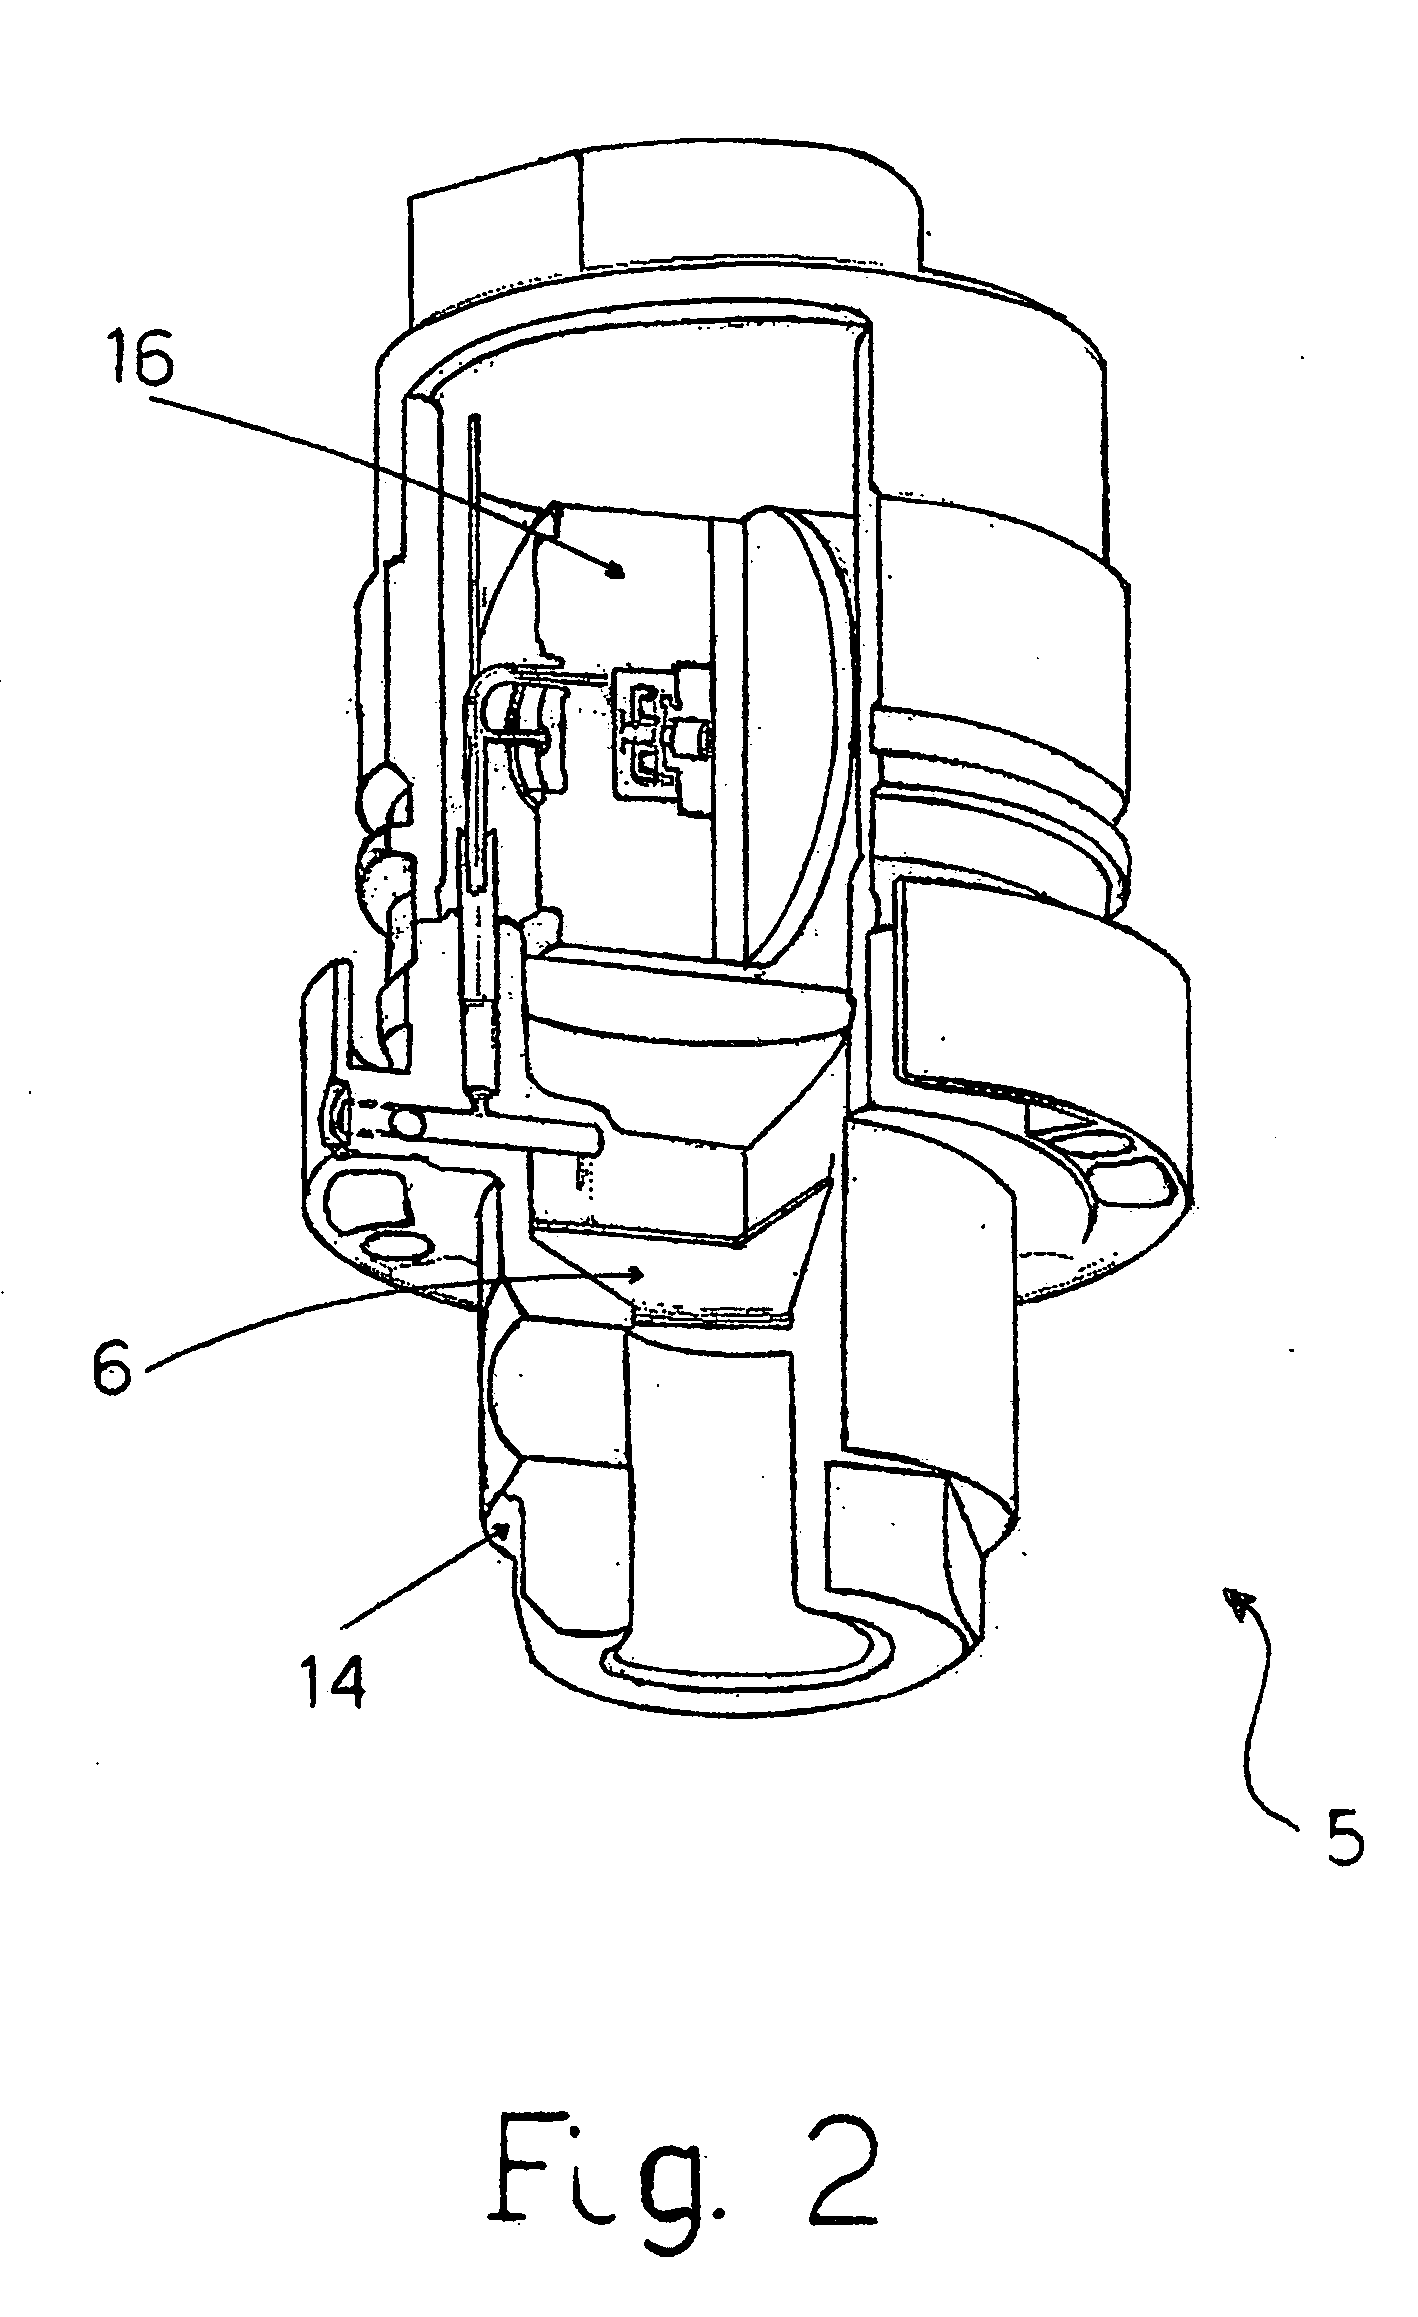 Device for detecting the position of a mobile element to which it is coupled and related mobile element